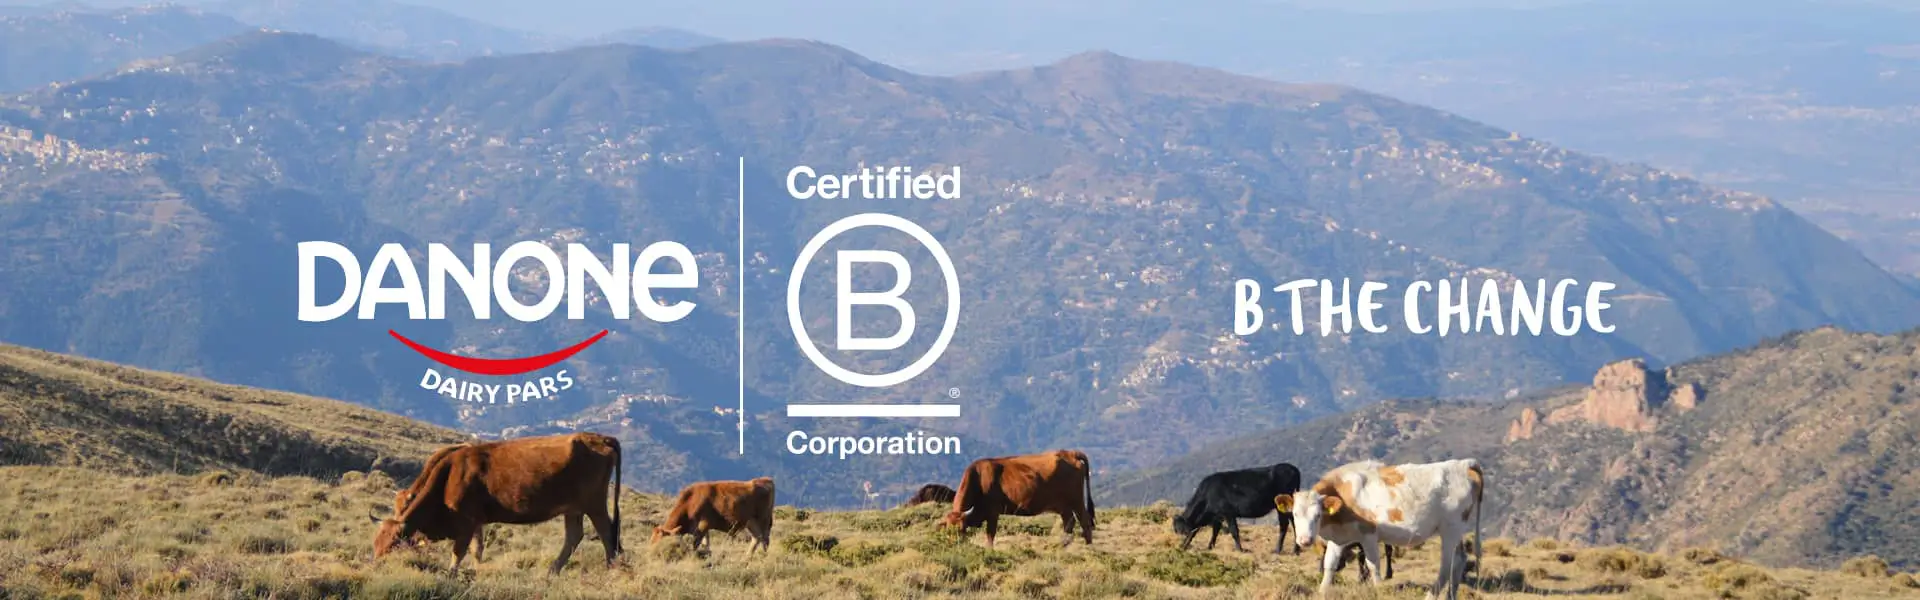 BCorp